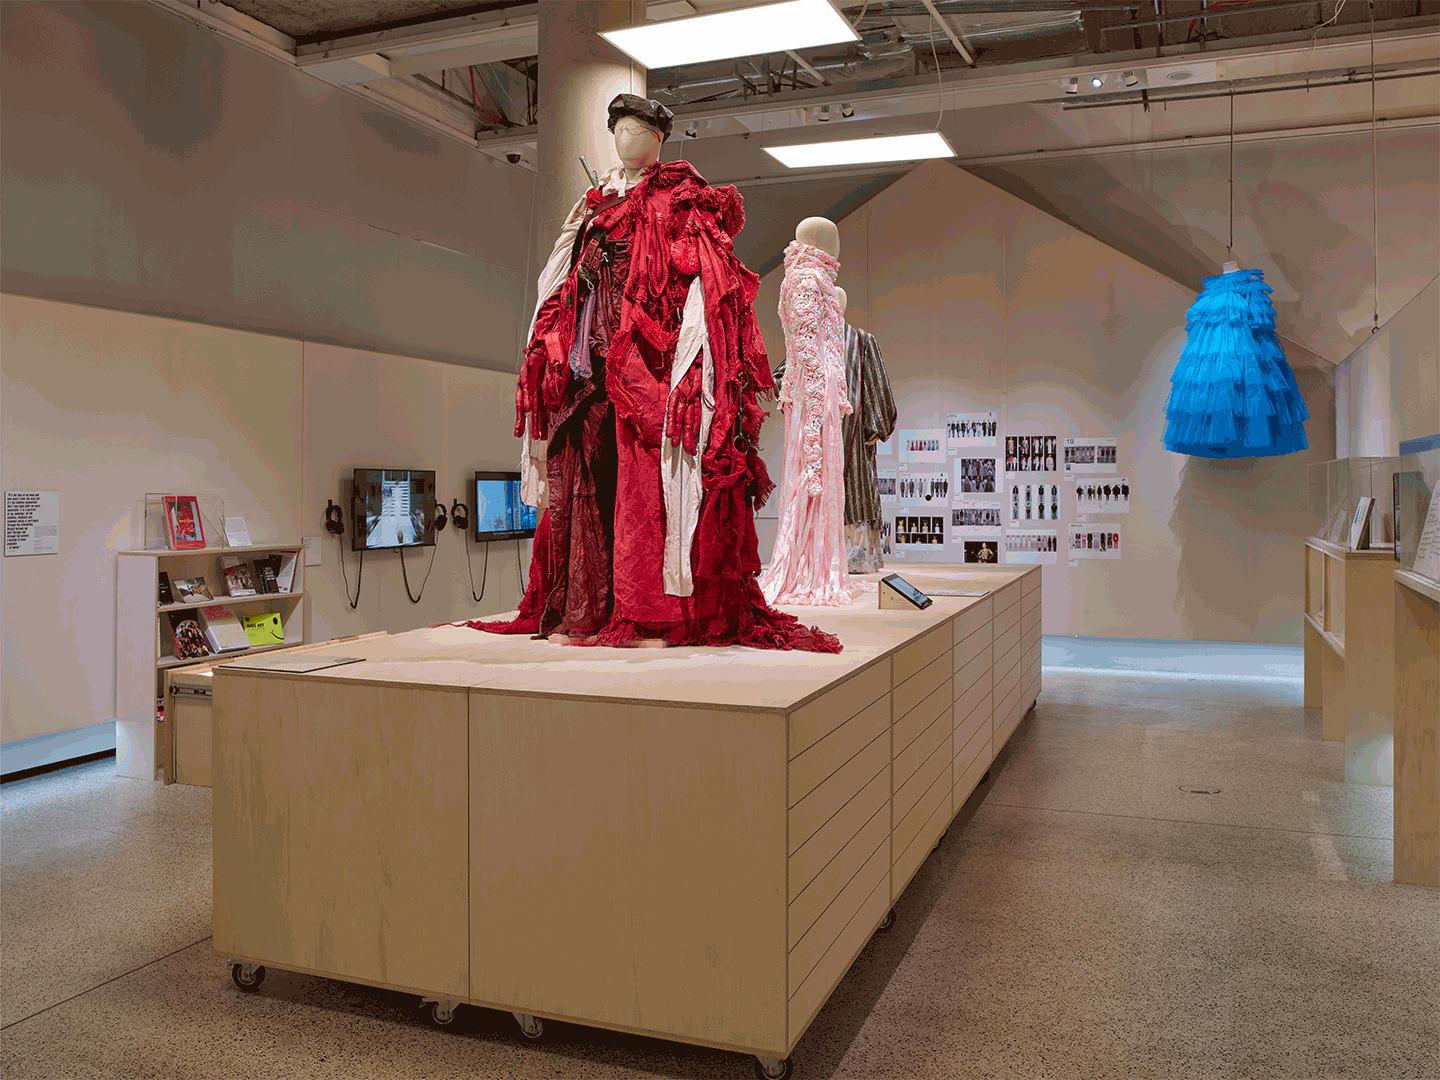 The Art School room of ‘Rebel: 30 Years of London Fashion’, the exhibition sponsored by Alexander McQueen. Photograph by Andy Stagg. Image Courtesy of The Design Museum